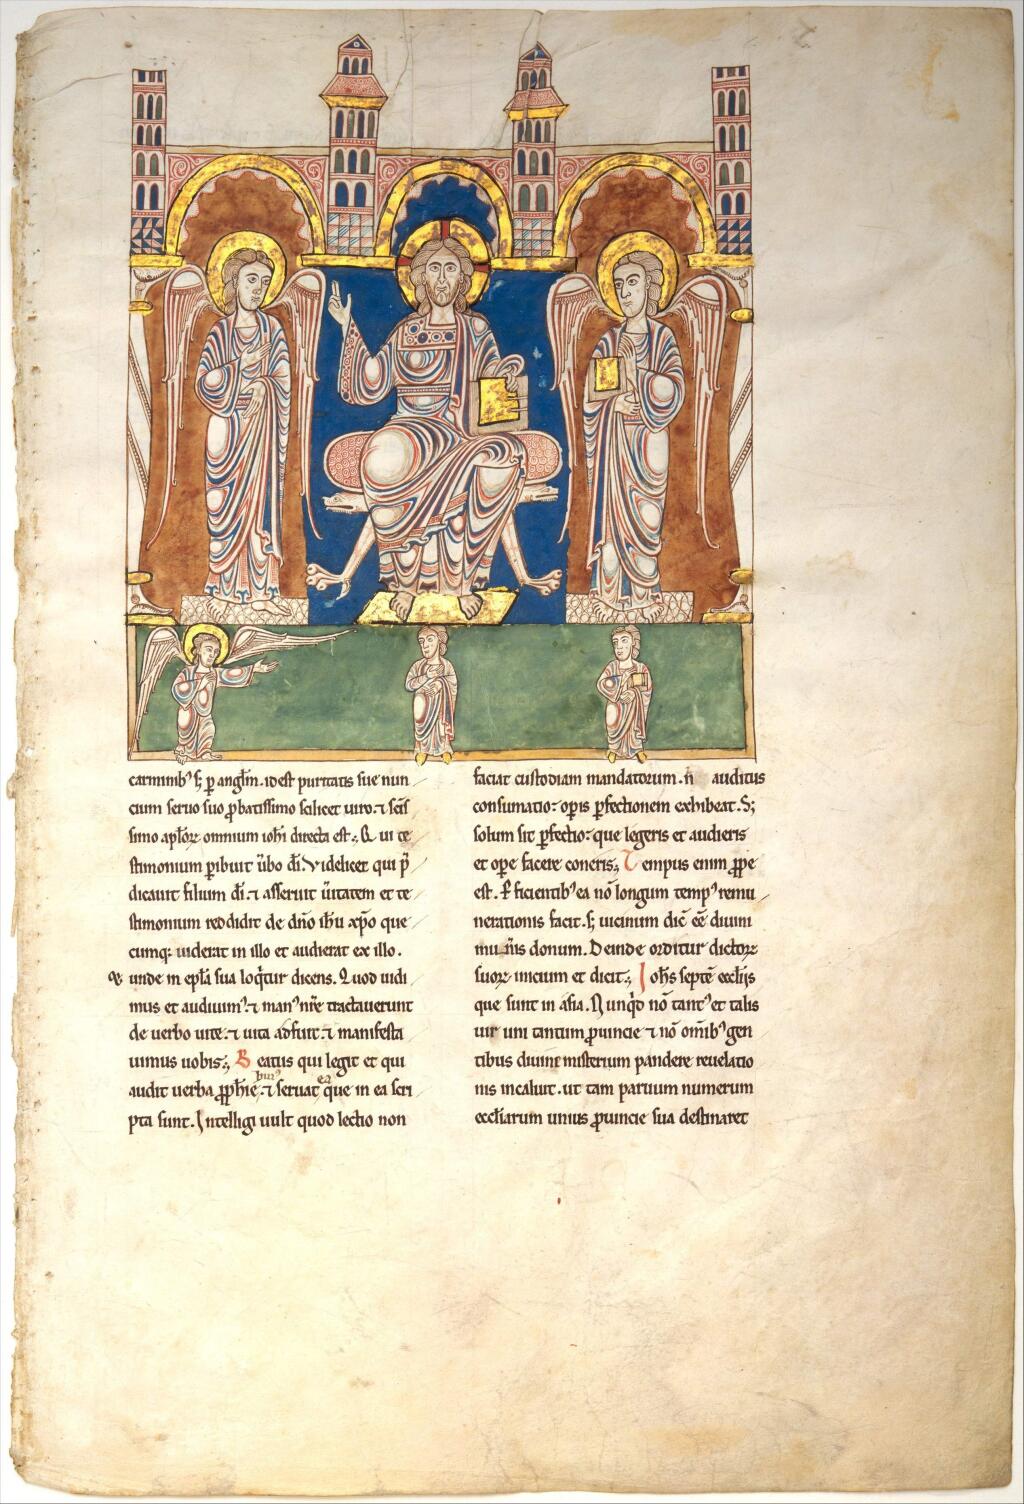 This image provided by the Metropolitan Museum of Art shows, a leaf from a Beatus Manuscript: Christ in Majesty with Angels and the Angel of God Directs Saint John to Write the Book of Revelation, ca. 1180. Modern-day scientists who examined the 1,000 year-old remains of a middle-aged woman in Germany discovered lapis lazuli, a semi-precious stone, in the tartar on her teeth. From that, they concluded the woman was an artist involved in creating illuminated manuscripts, a task usually associated with monks. The find is considered the most direct evidence yet of a woman taking part in the making of high-quality illuminated manuscripts, the lavishly illustrated religious and secular texts of the Middle Ages. And it corroborates other findings that suggest female artisans were not as rare as previously thought. (Metropolitan Museum of Art via AP)